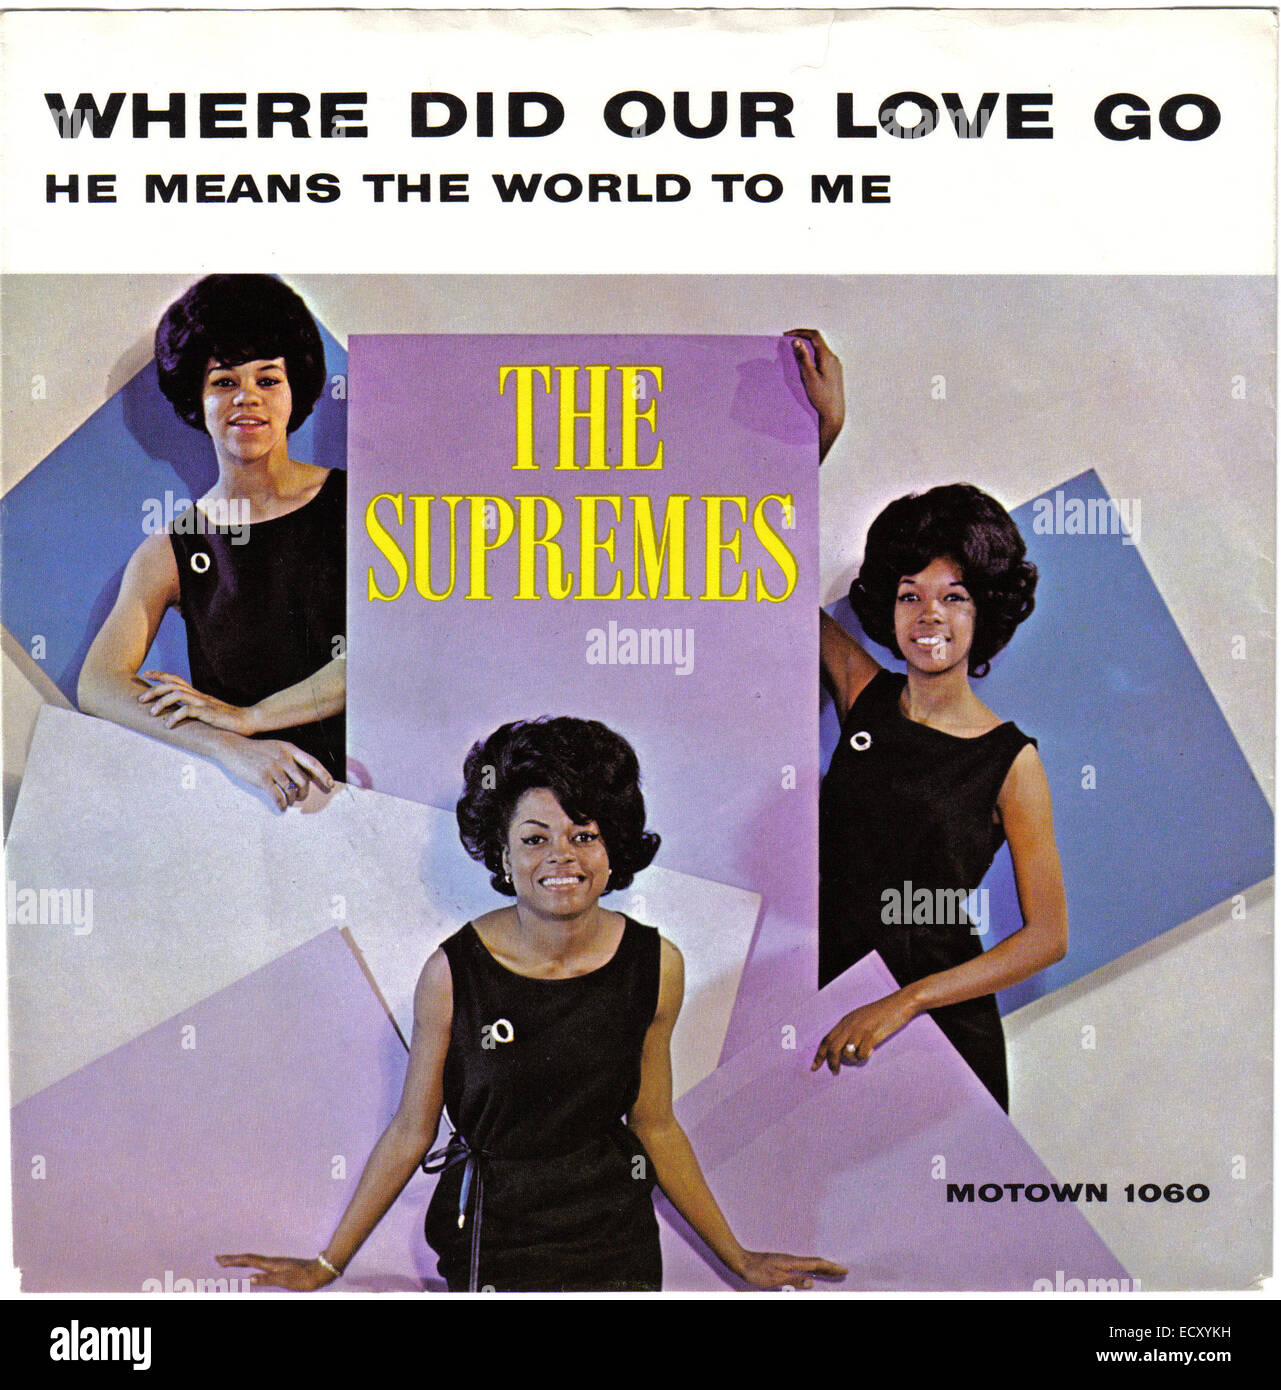 THE SUPREMES, circa 1960s.  Courtesy Granamour Weems Collection.  Editorial use only.  Licensee must obtain appropriate permissions and clearances before using this photo.  No rights are granted or implied. Stock Photo